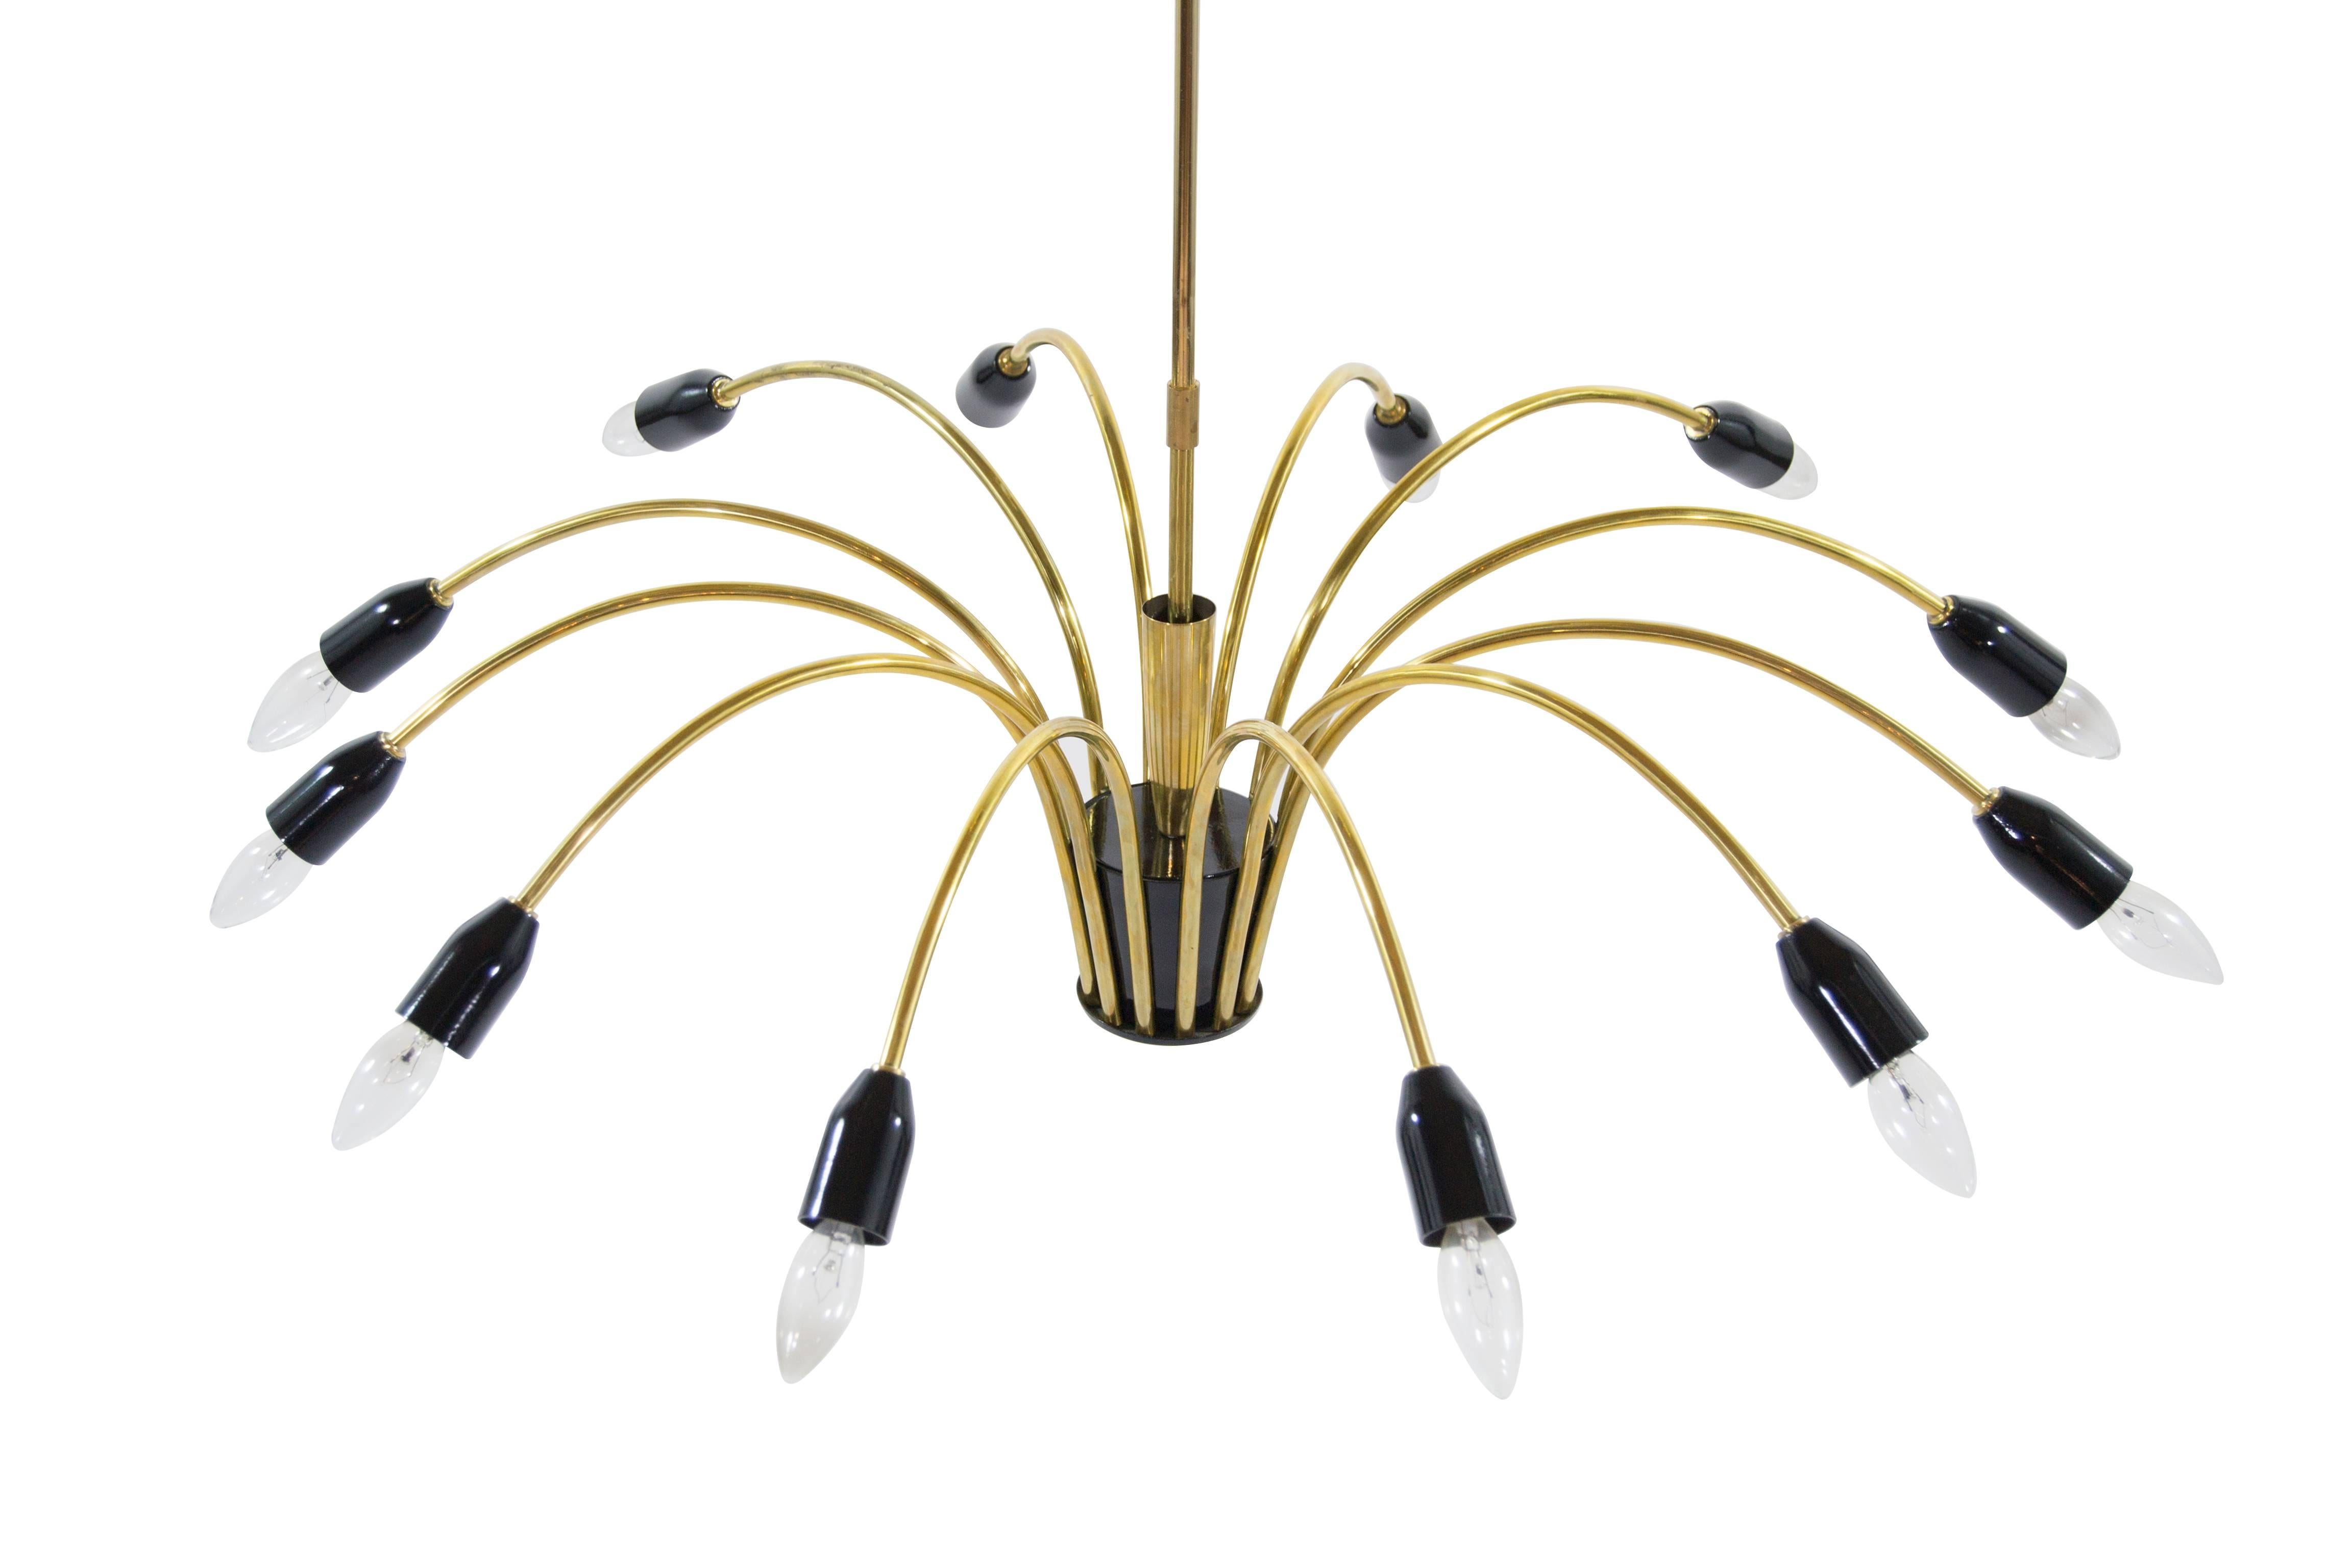 Stilnovo style Italian chandelier manufactured in Italy, circa 1960s. Featuring 12 curved brass arms ending black enameled sockets. Fully restored, rewired. New canopy installed to fit standard j-box, height adjustable.